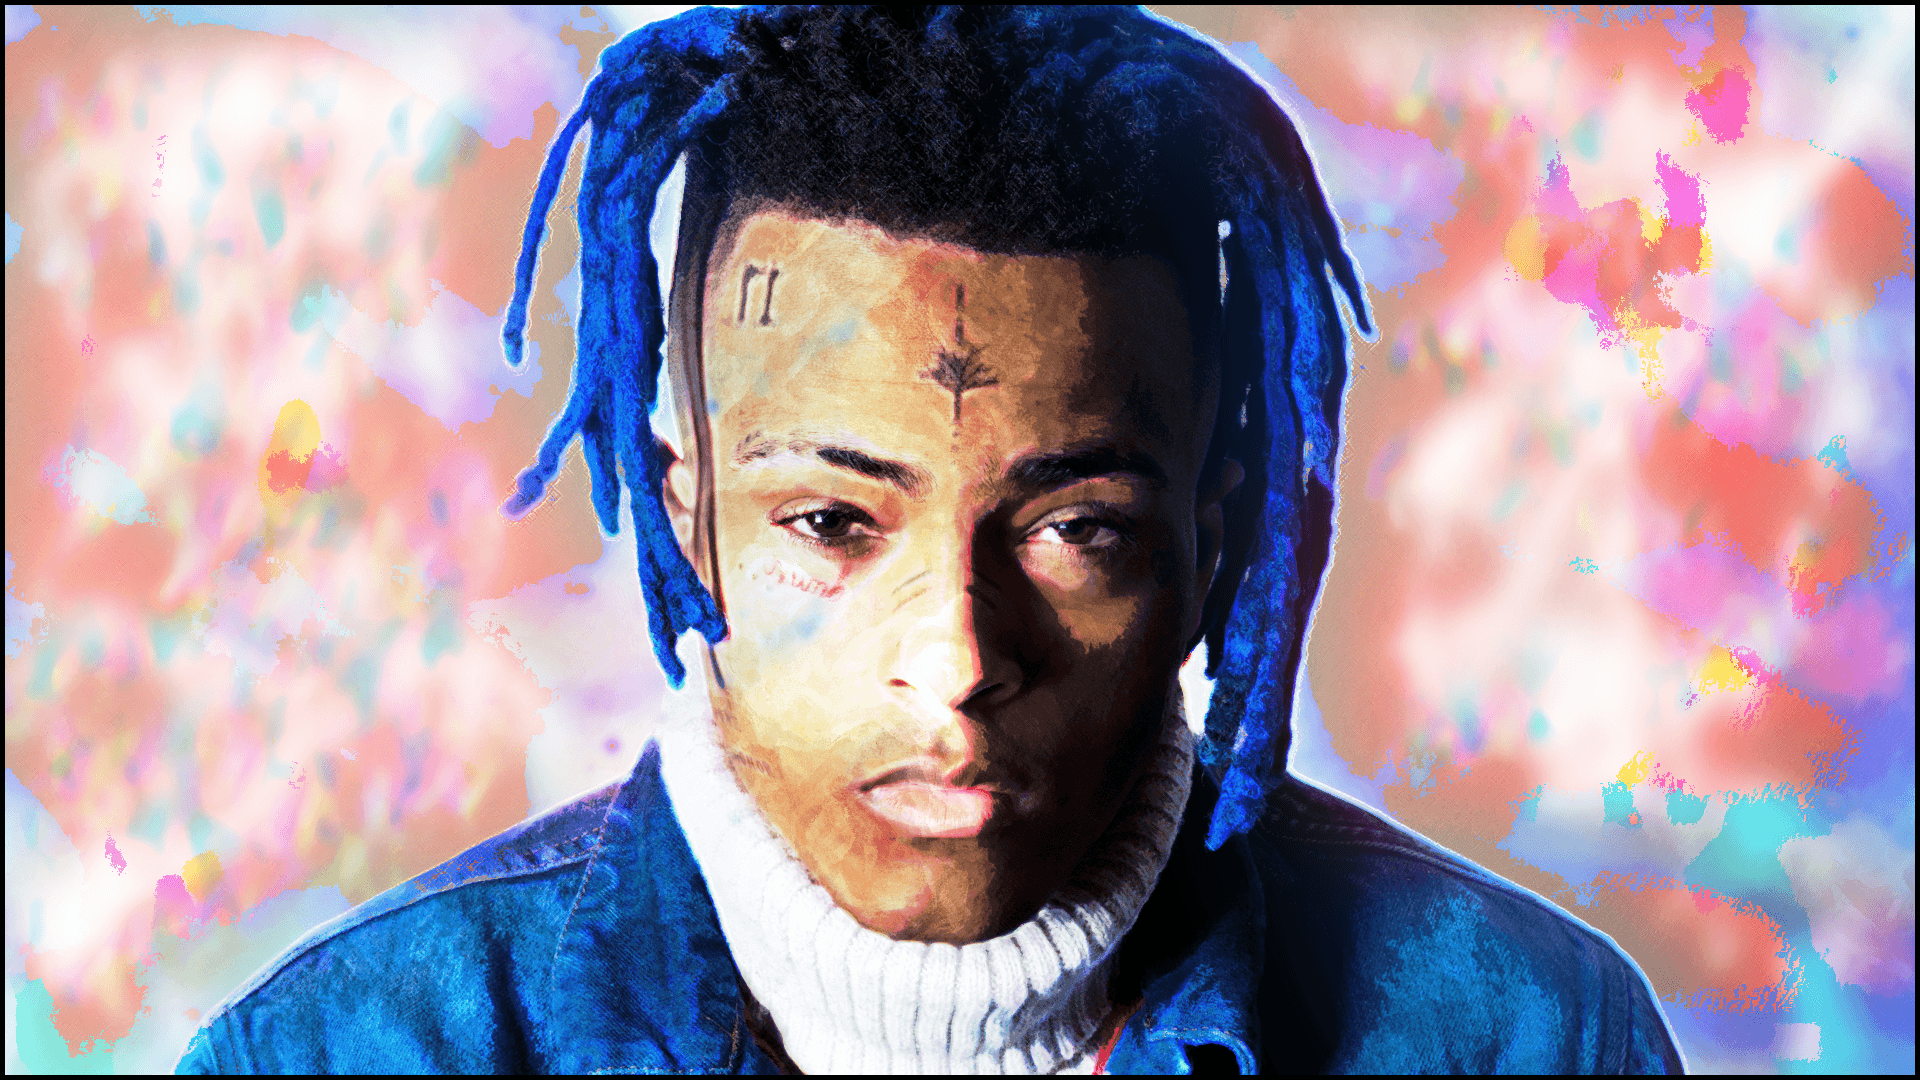 XXXTentacion's Blue Hair Evolution: A Look at His Most Iconic Styles - wide 6